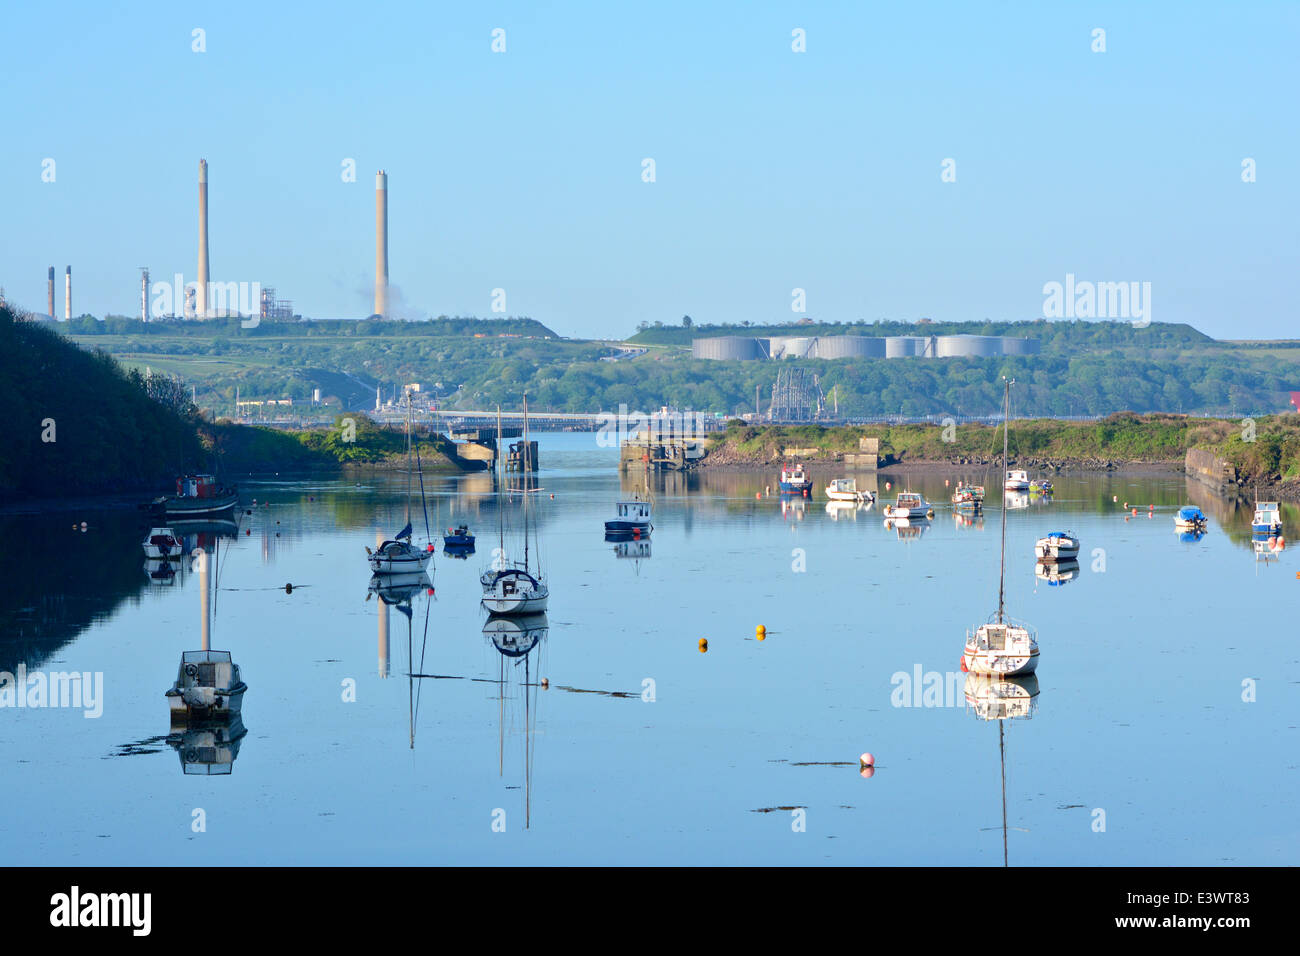 Castle Pill - Milford Haven, Pembrokeshire, Wales, UK Stock Photo